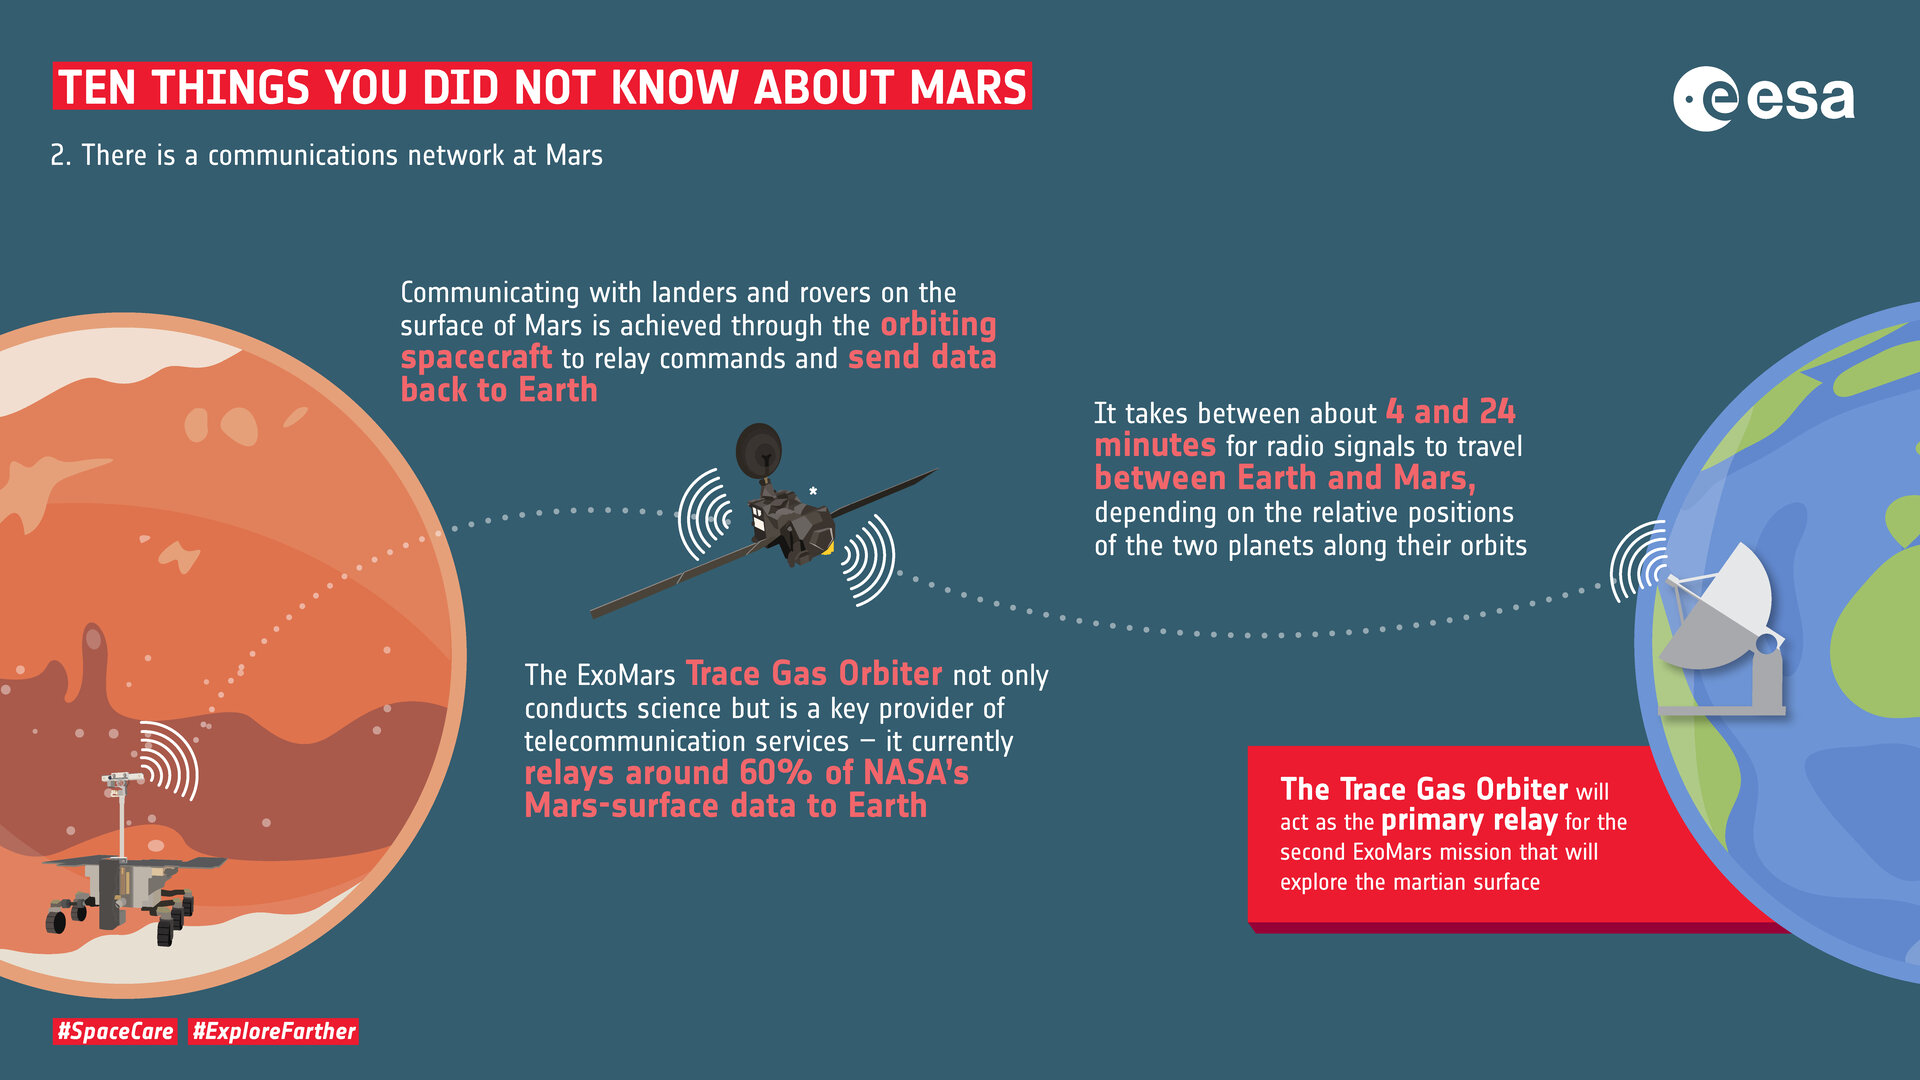 Ten things you did not know about Mars: 2. Communications network